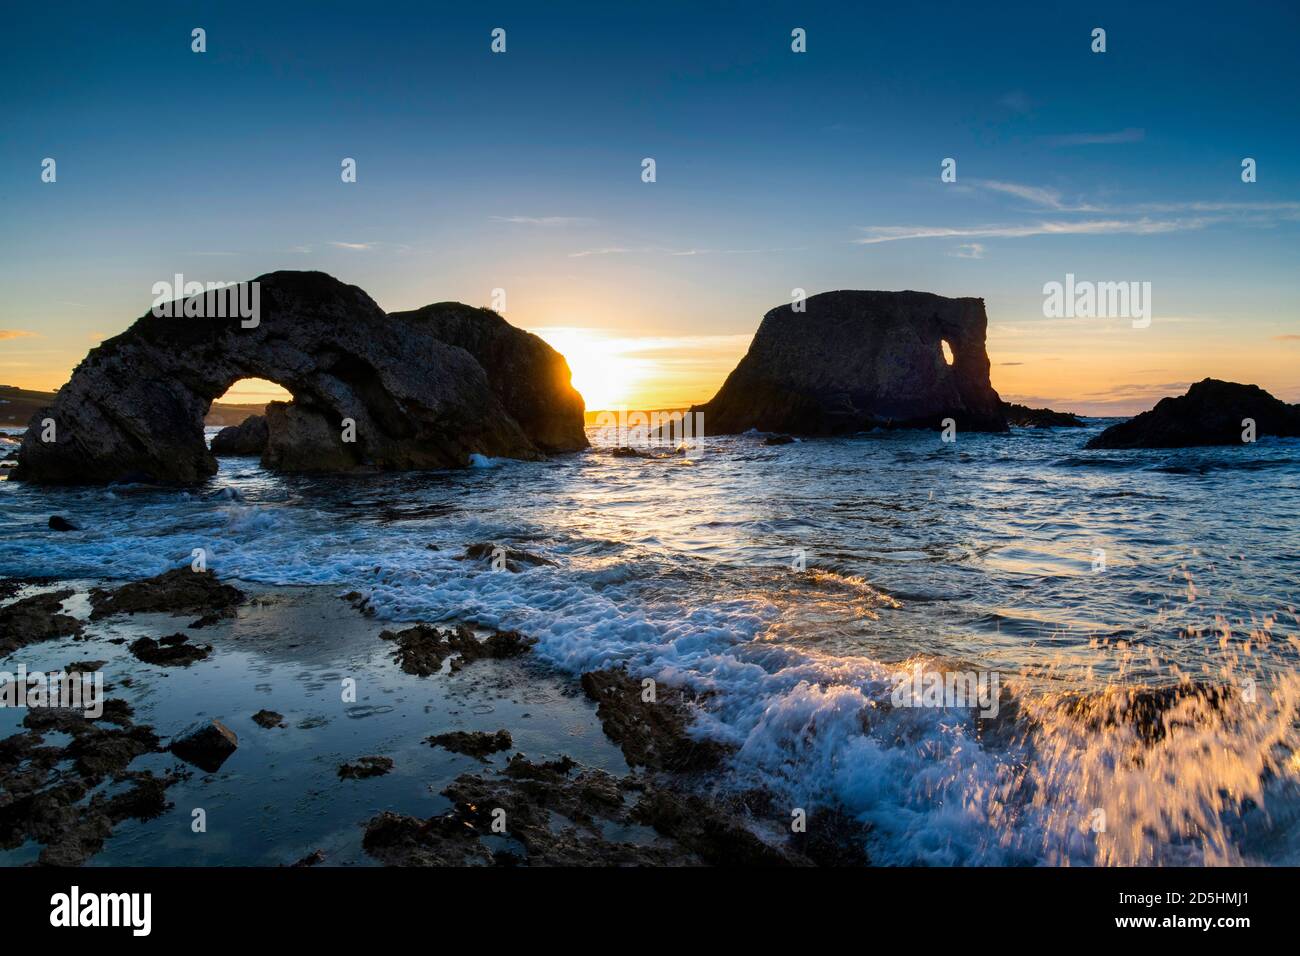 Elephant rock and Great Arch at Ballintoy at Sunset, Causeway Coast, Northern Ireland Stock Photo